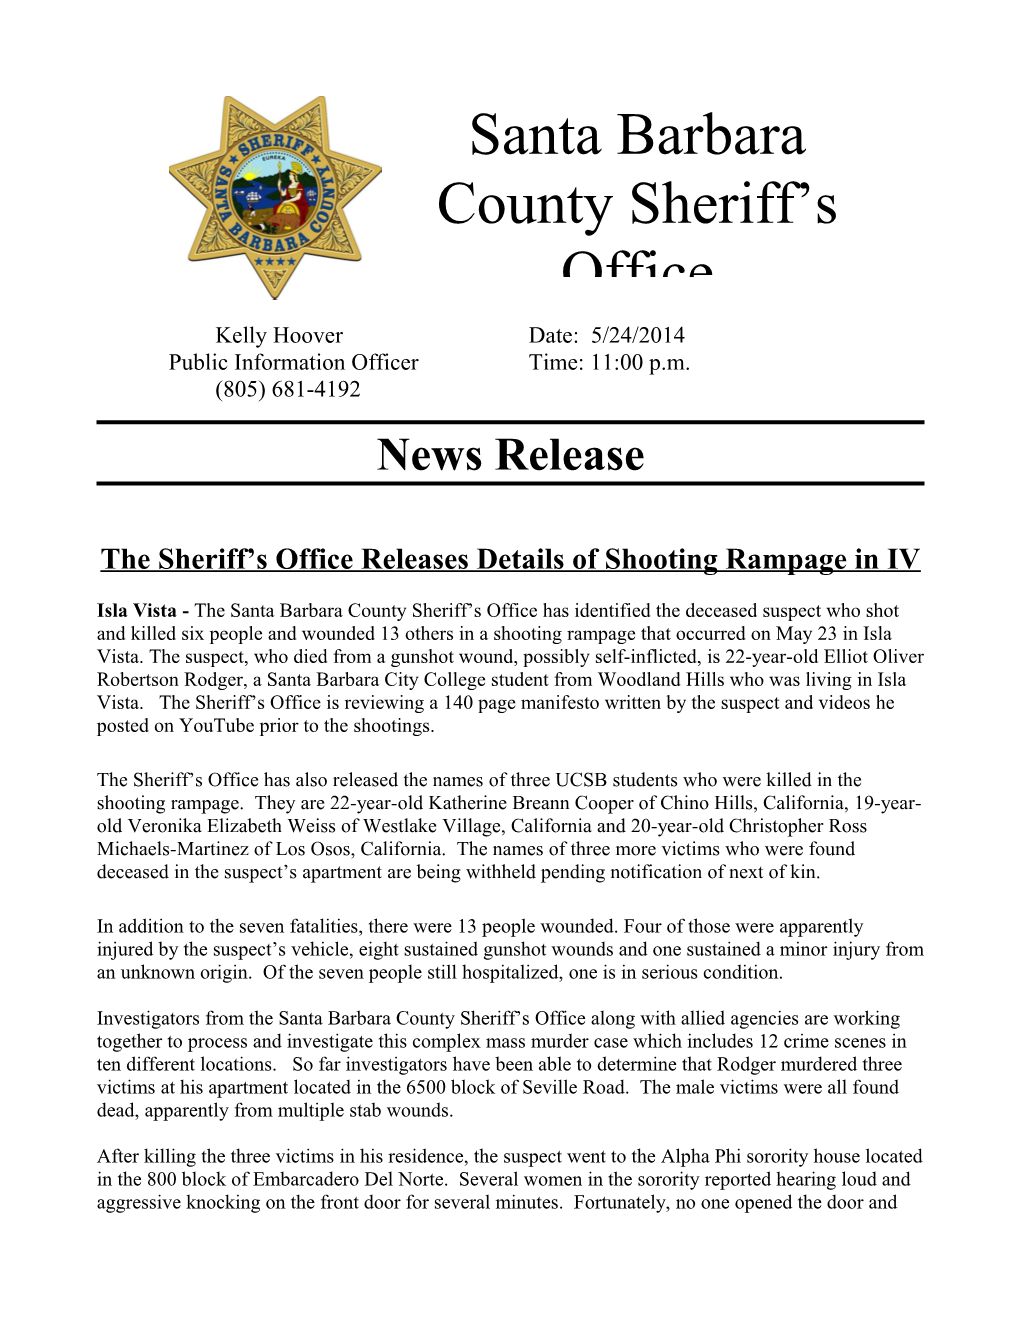 The Sheriff S Office Releases Details of Shooting Rampage in IV